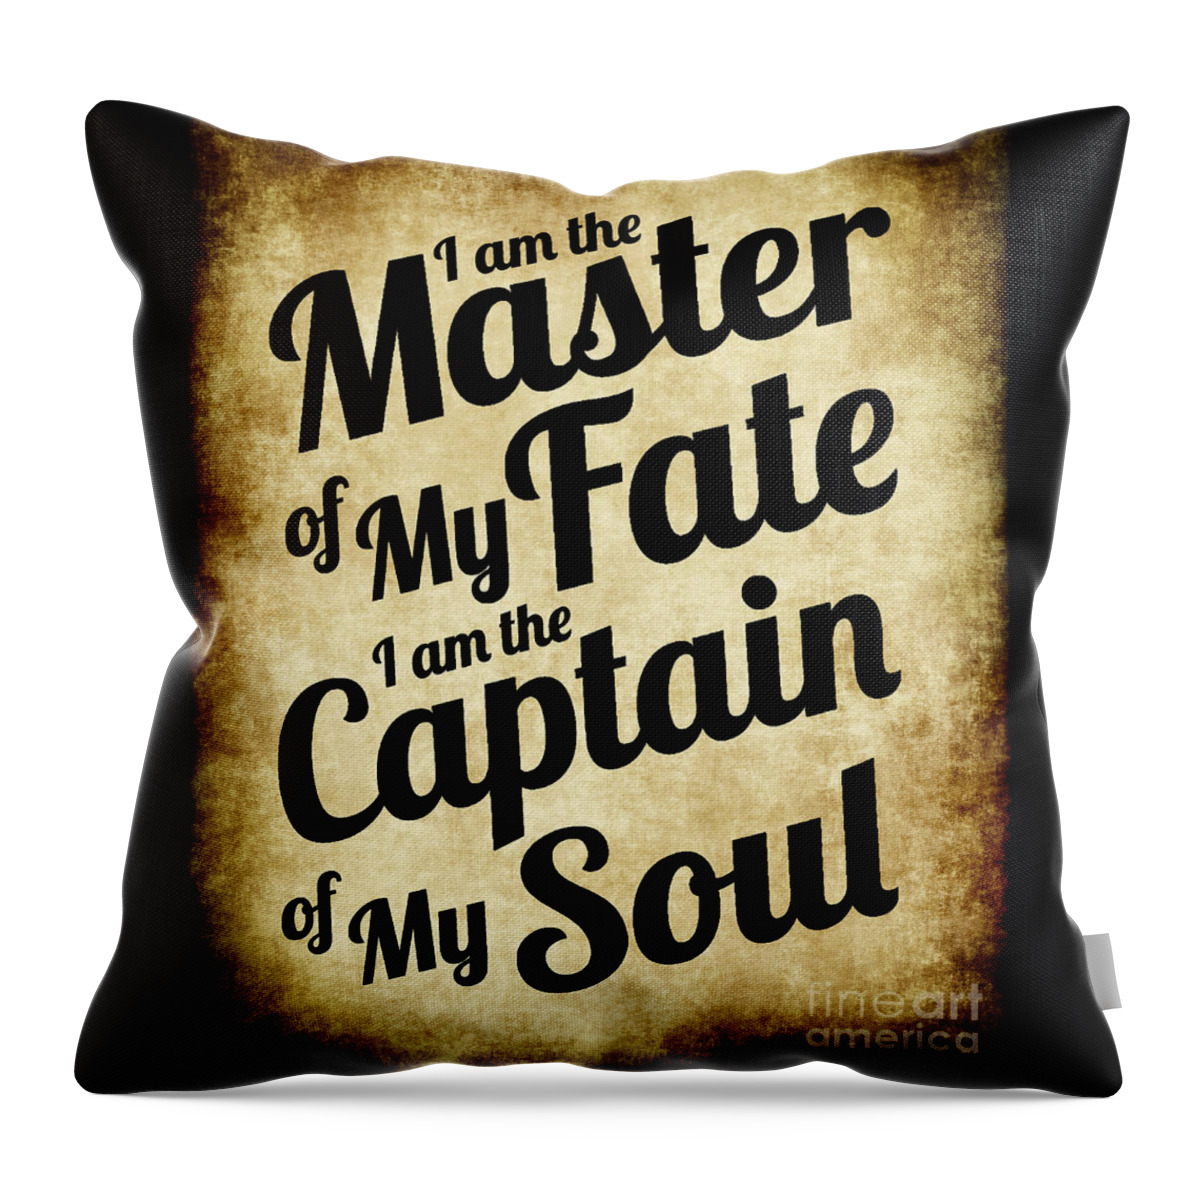 Invictus Throw Pillow featuring the digital art Master of My Fate - Old Parchment Style by Ginny Gaura